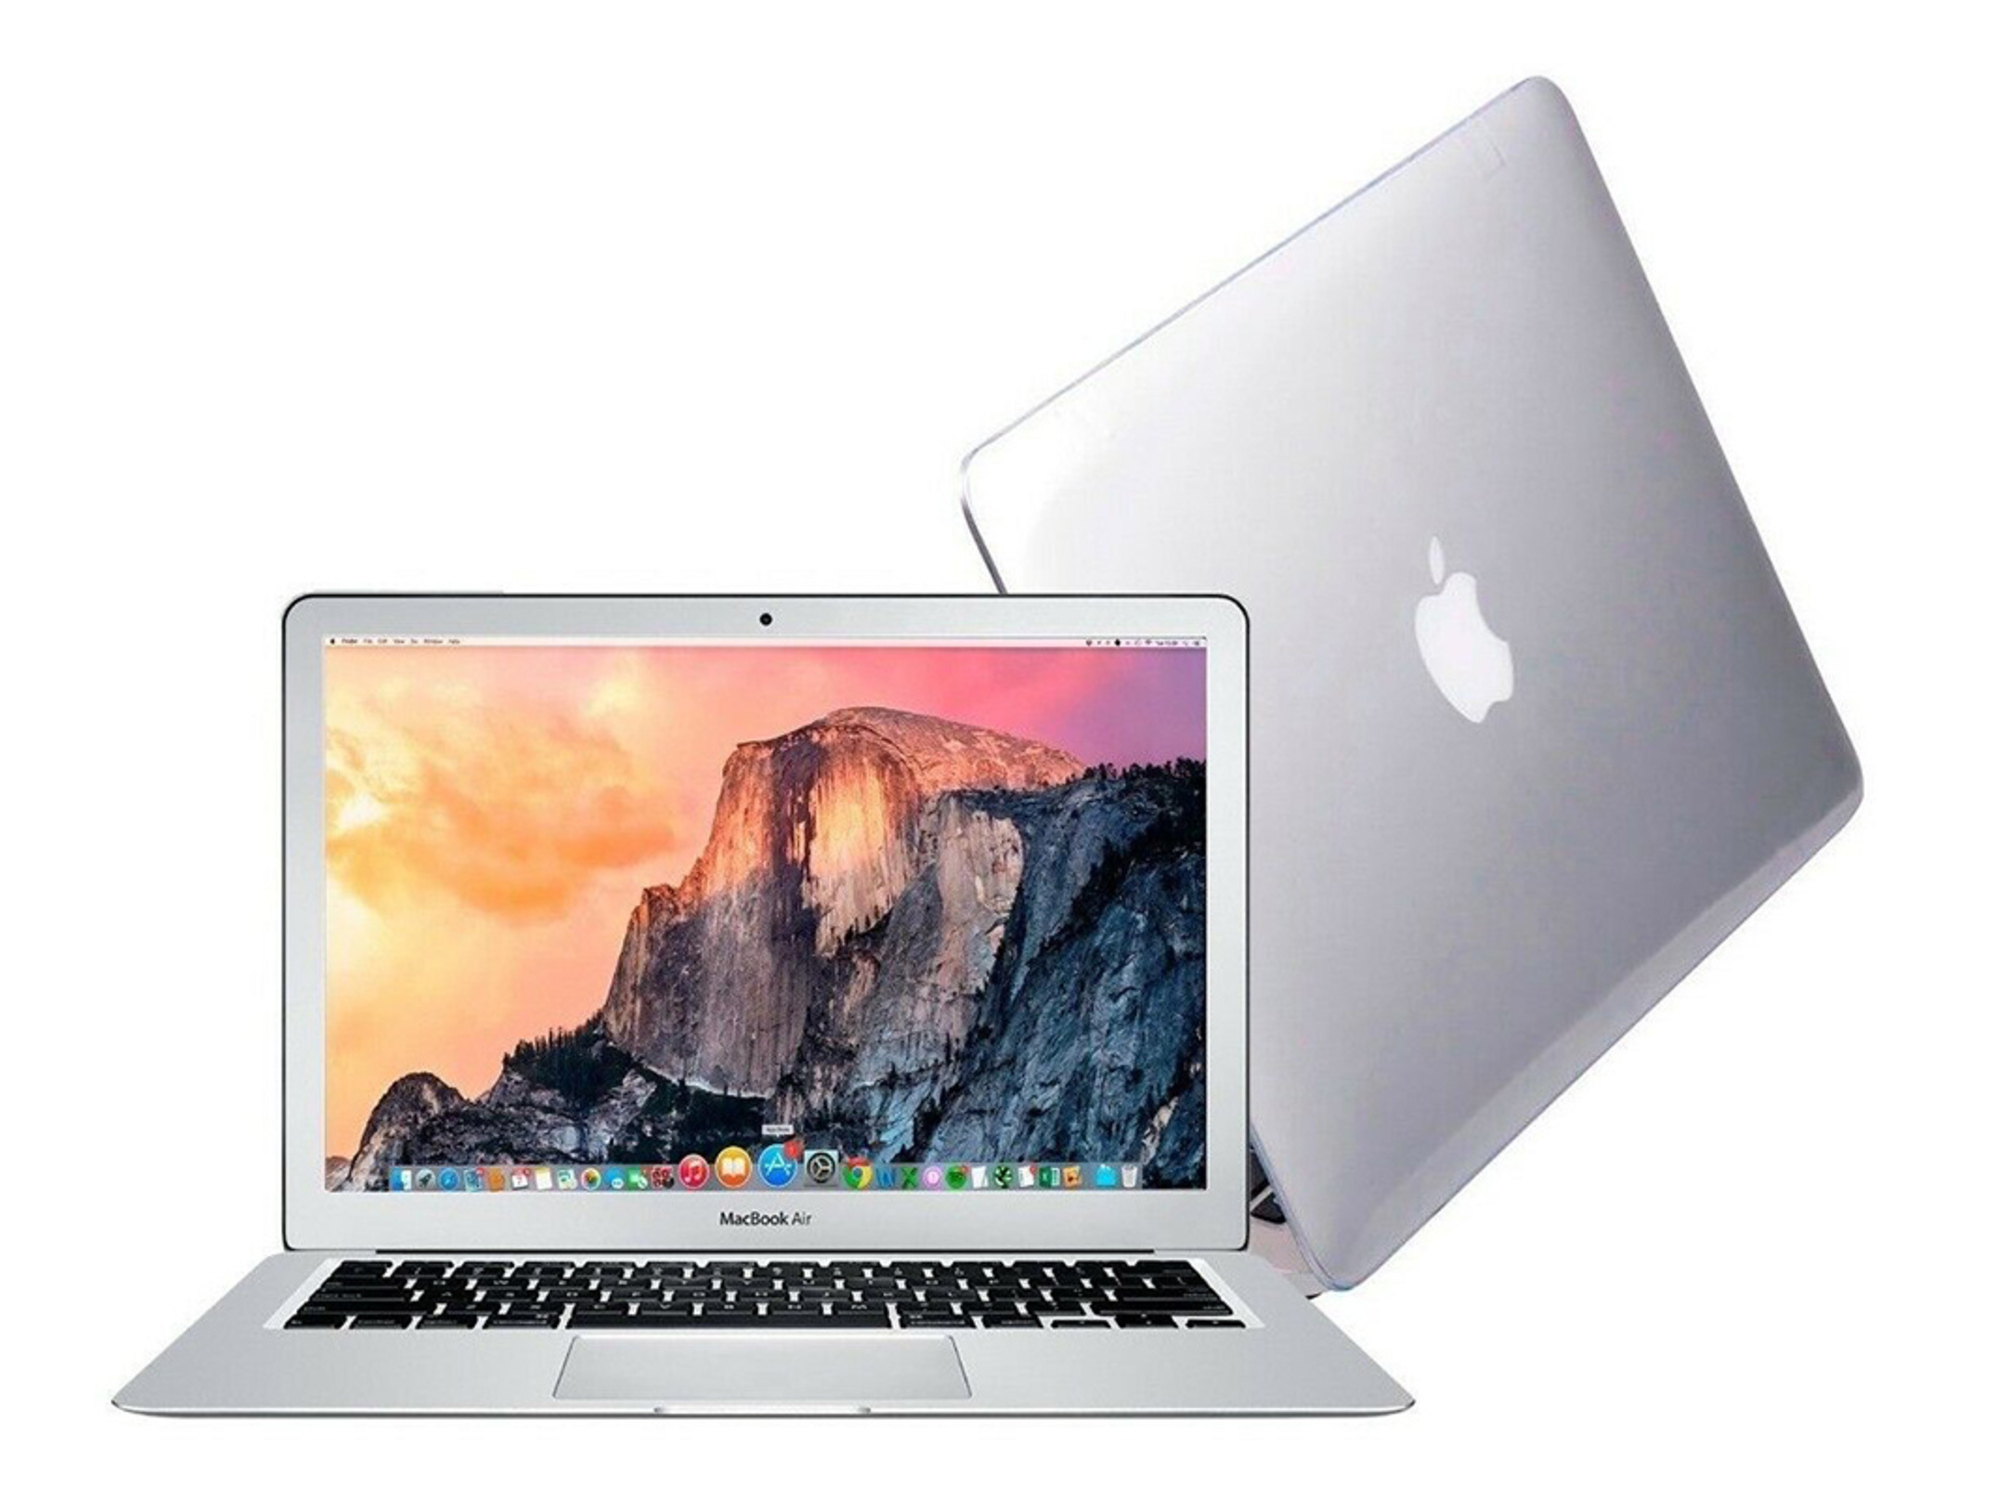 Celebrate Apple Day with over $1,000 off this refurbished 13.3″ MacBook Air